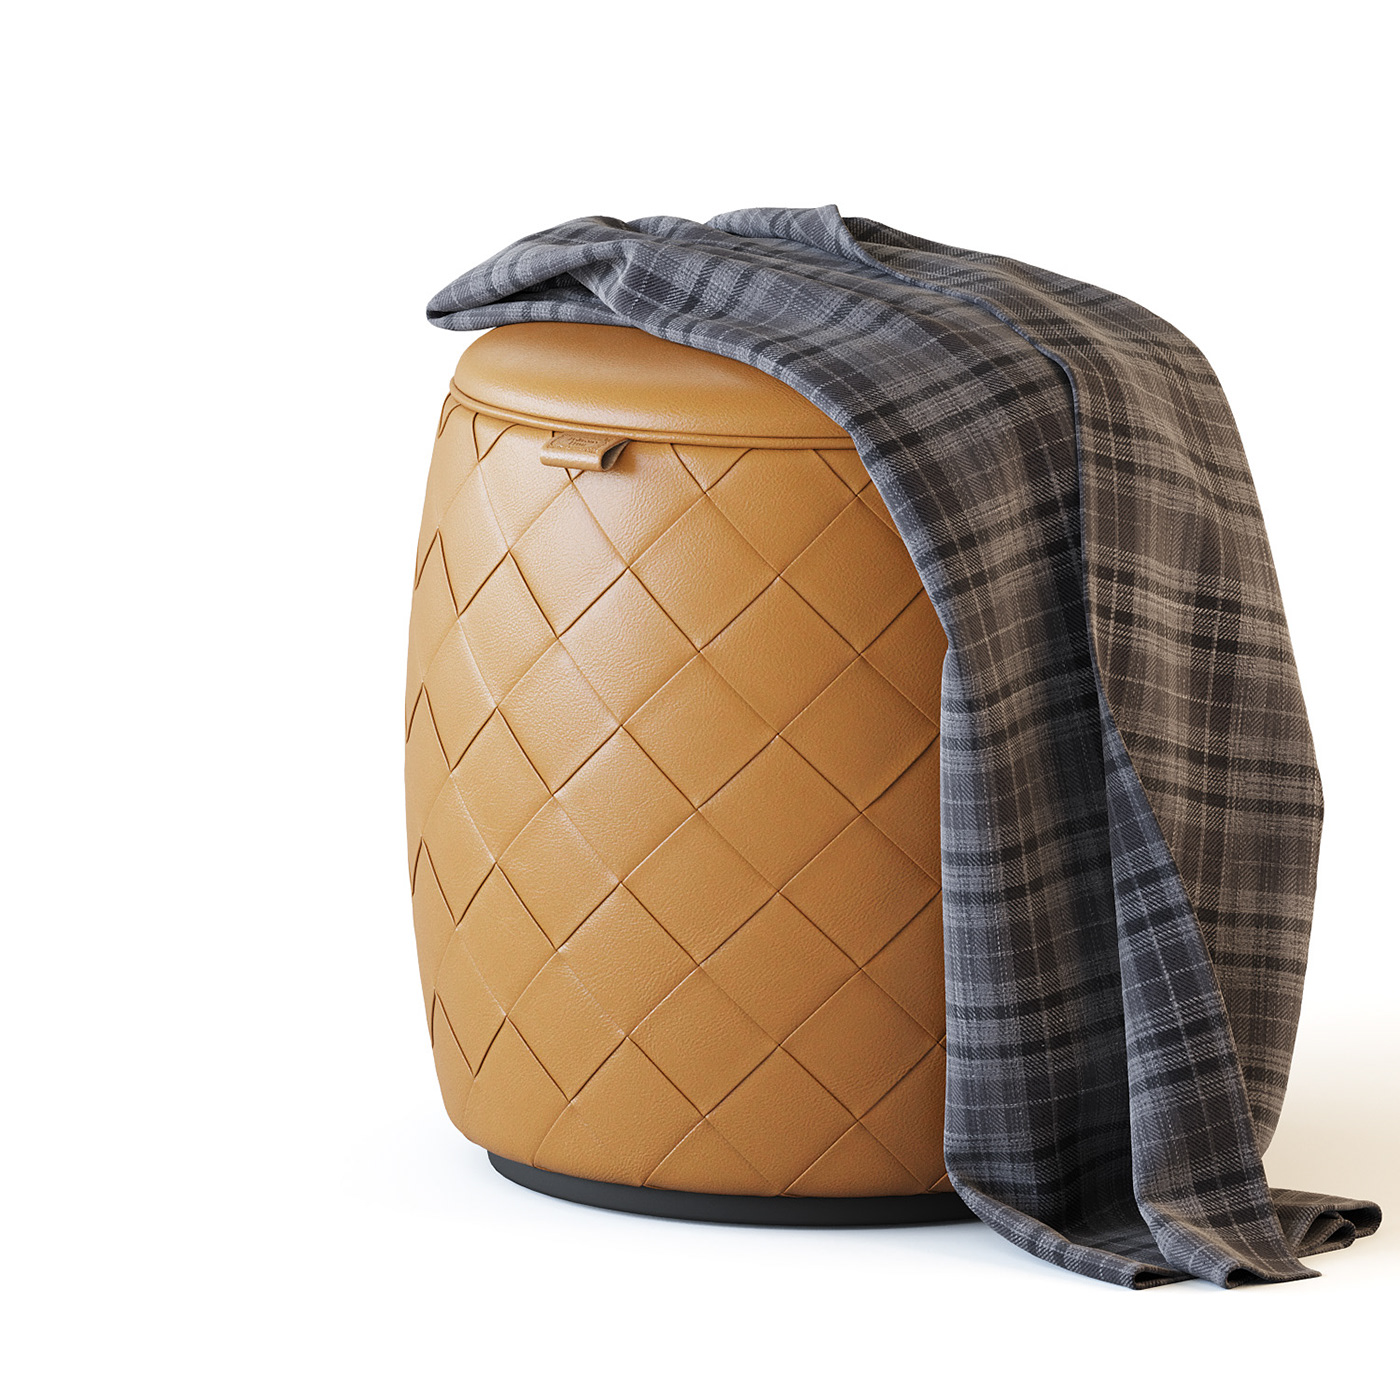 leather ottoman weaving plaid clouth poofy 3D 3ds max Render corona